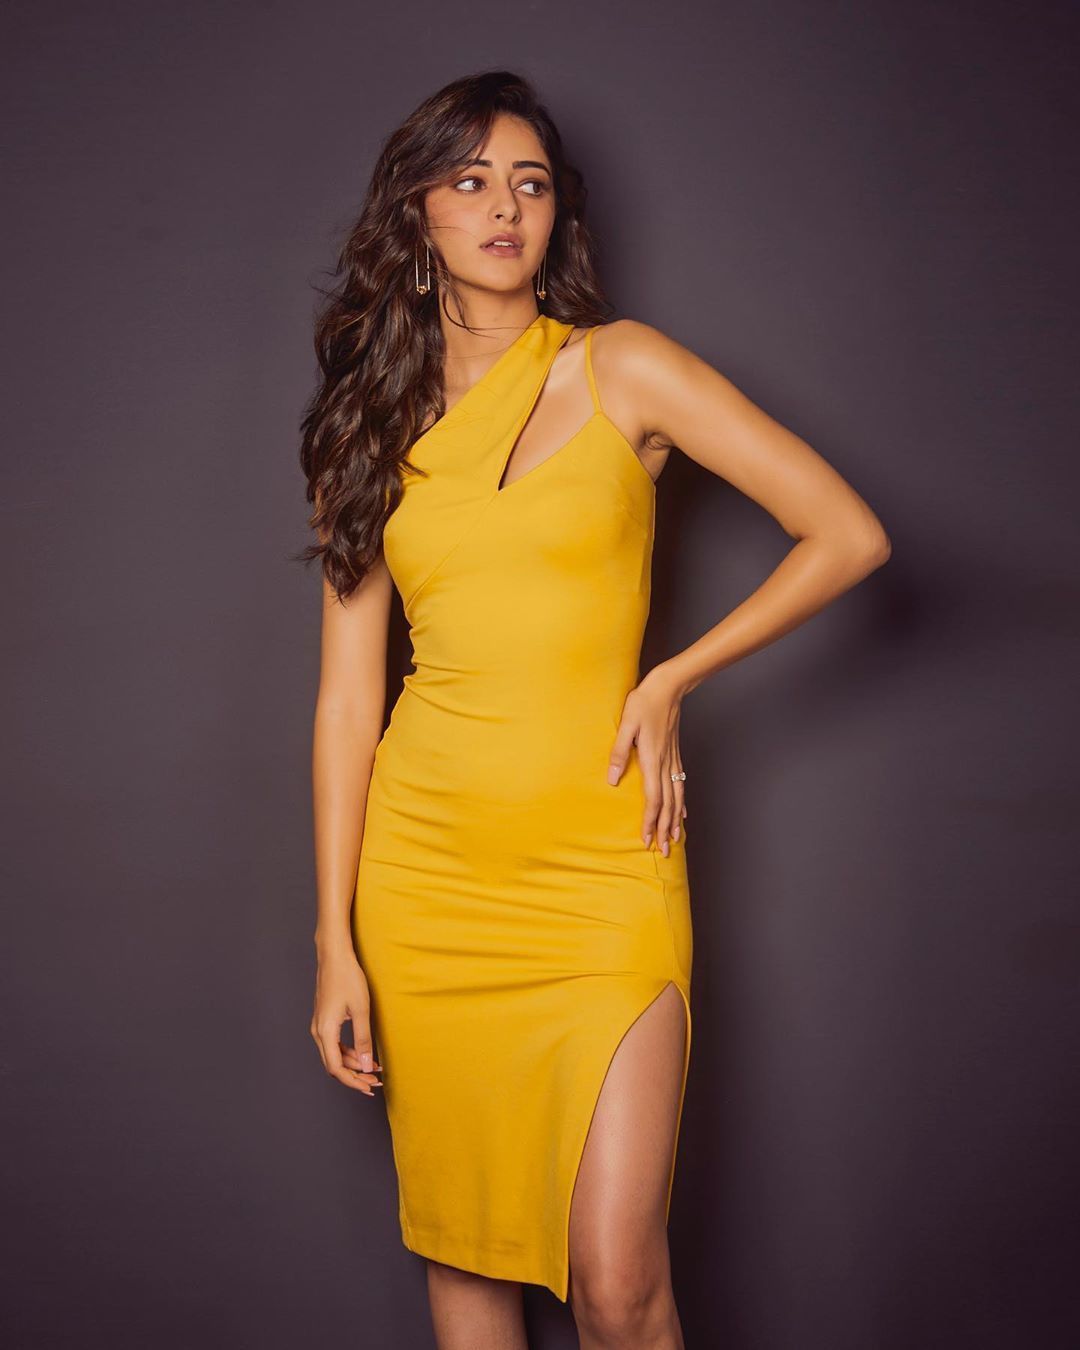 IN PICS: Ananya Panday's Hottest Looks In Bodycon Outfits 4